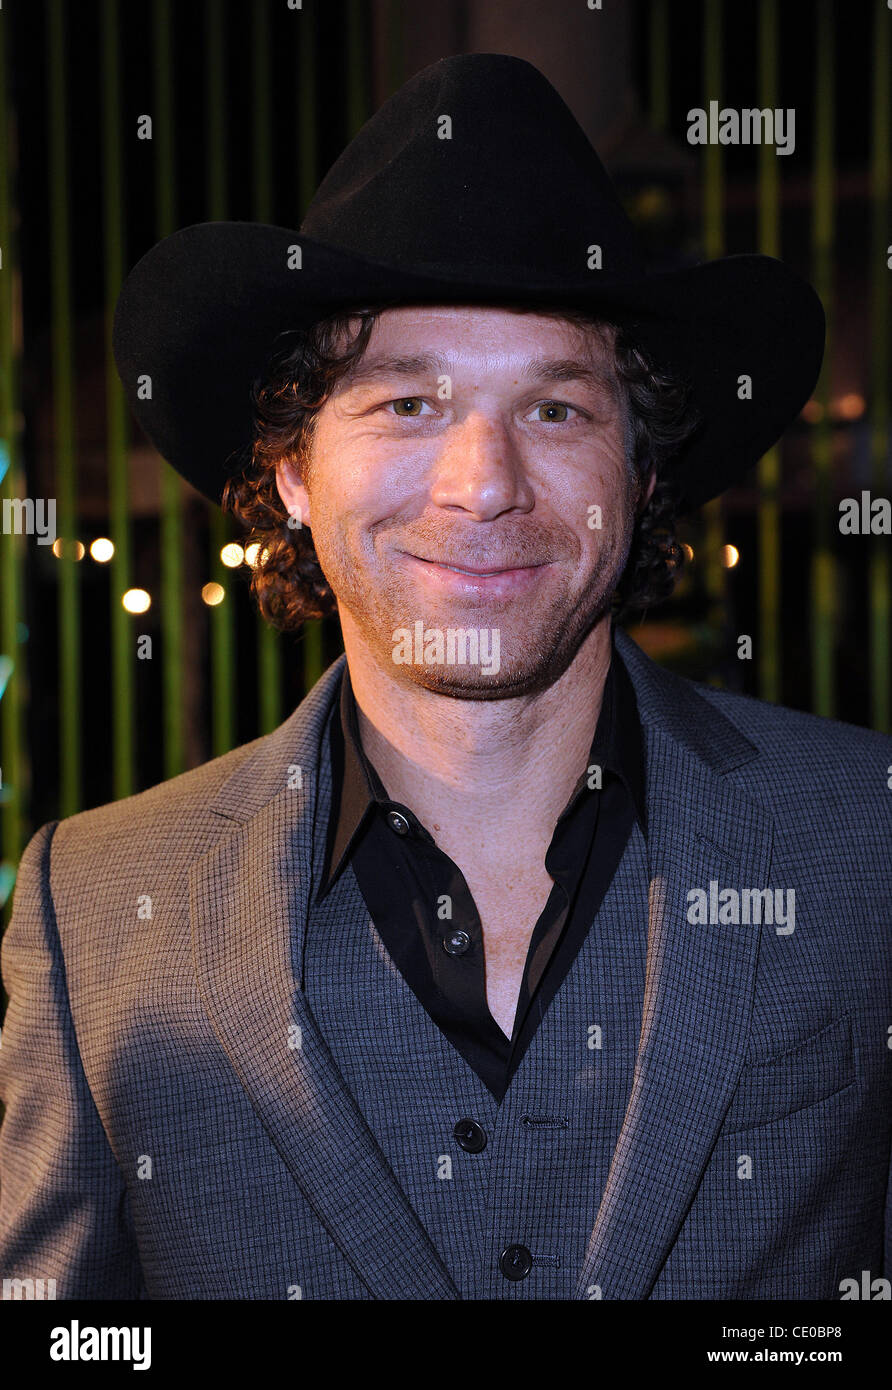 Nov 8, 2011 - Nashville, Tennessee; USA -  Songwriter SCOTTY EMERICK arrives on the red carpet as part of the 59th Annual BMI Country Awards that took place at the BMI Building located Nashville.  Copyright 2011 Jason Moore. (Credit Image: © Jason Moore/ZUMAPRESS.com) Stock Photo